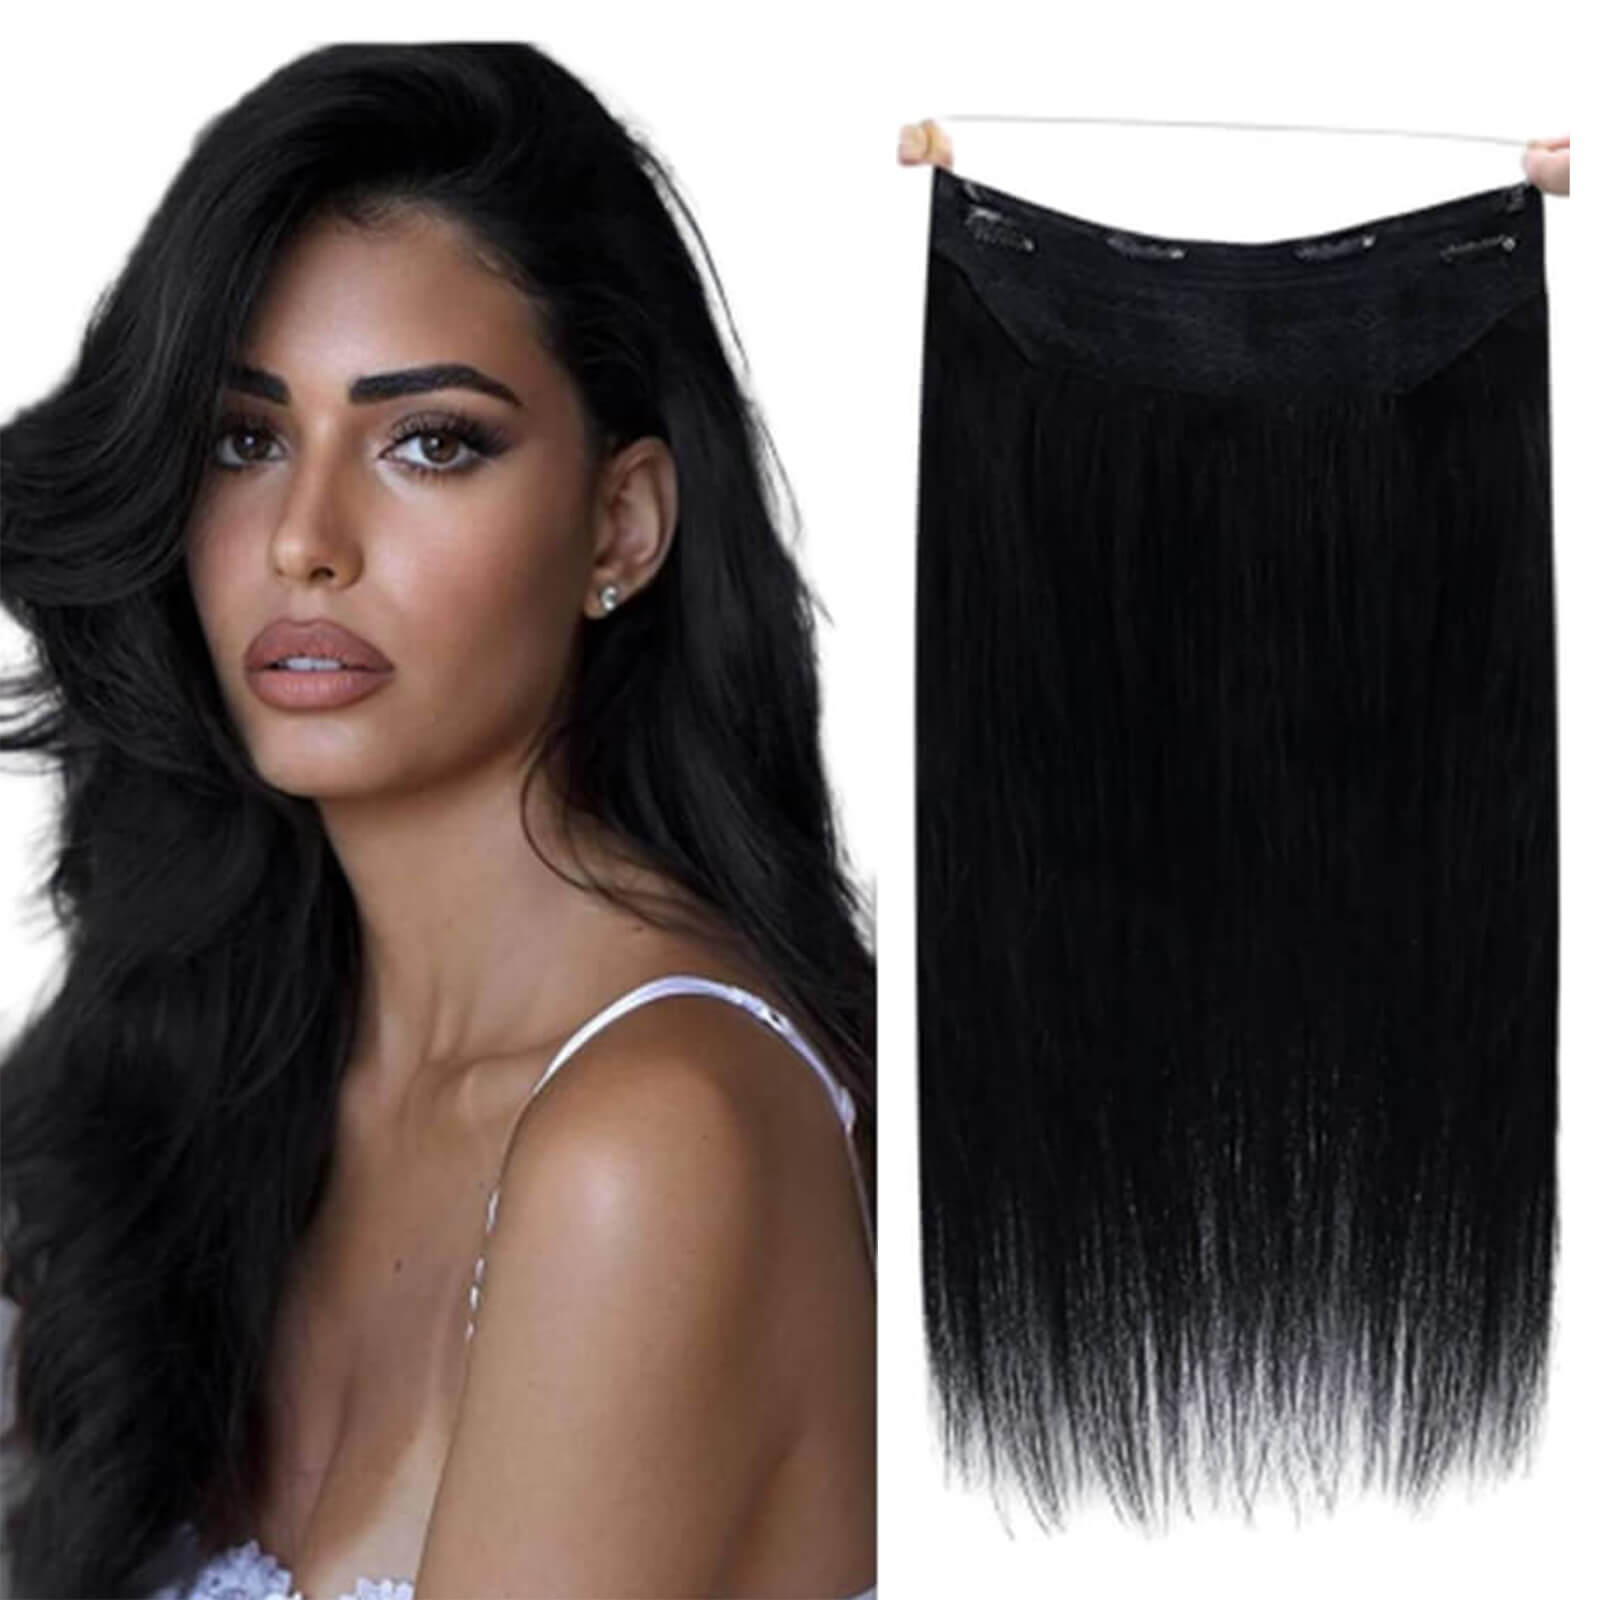 Fish Line Hair Extensions Black Human Hair with 2 Pieces Clip in Hair Extensions